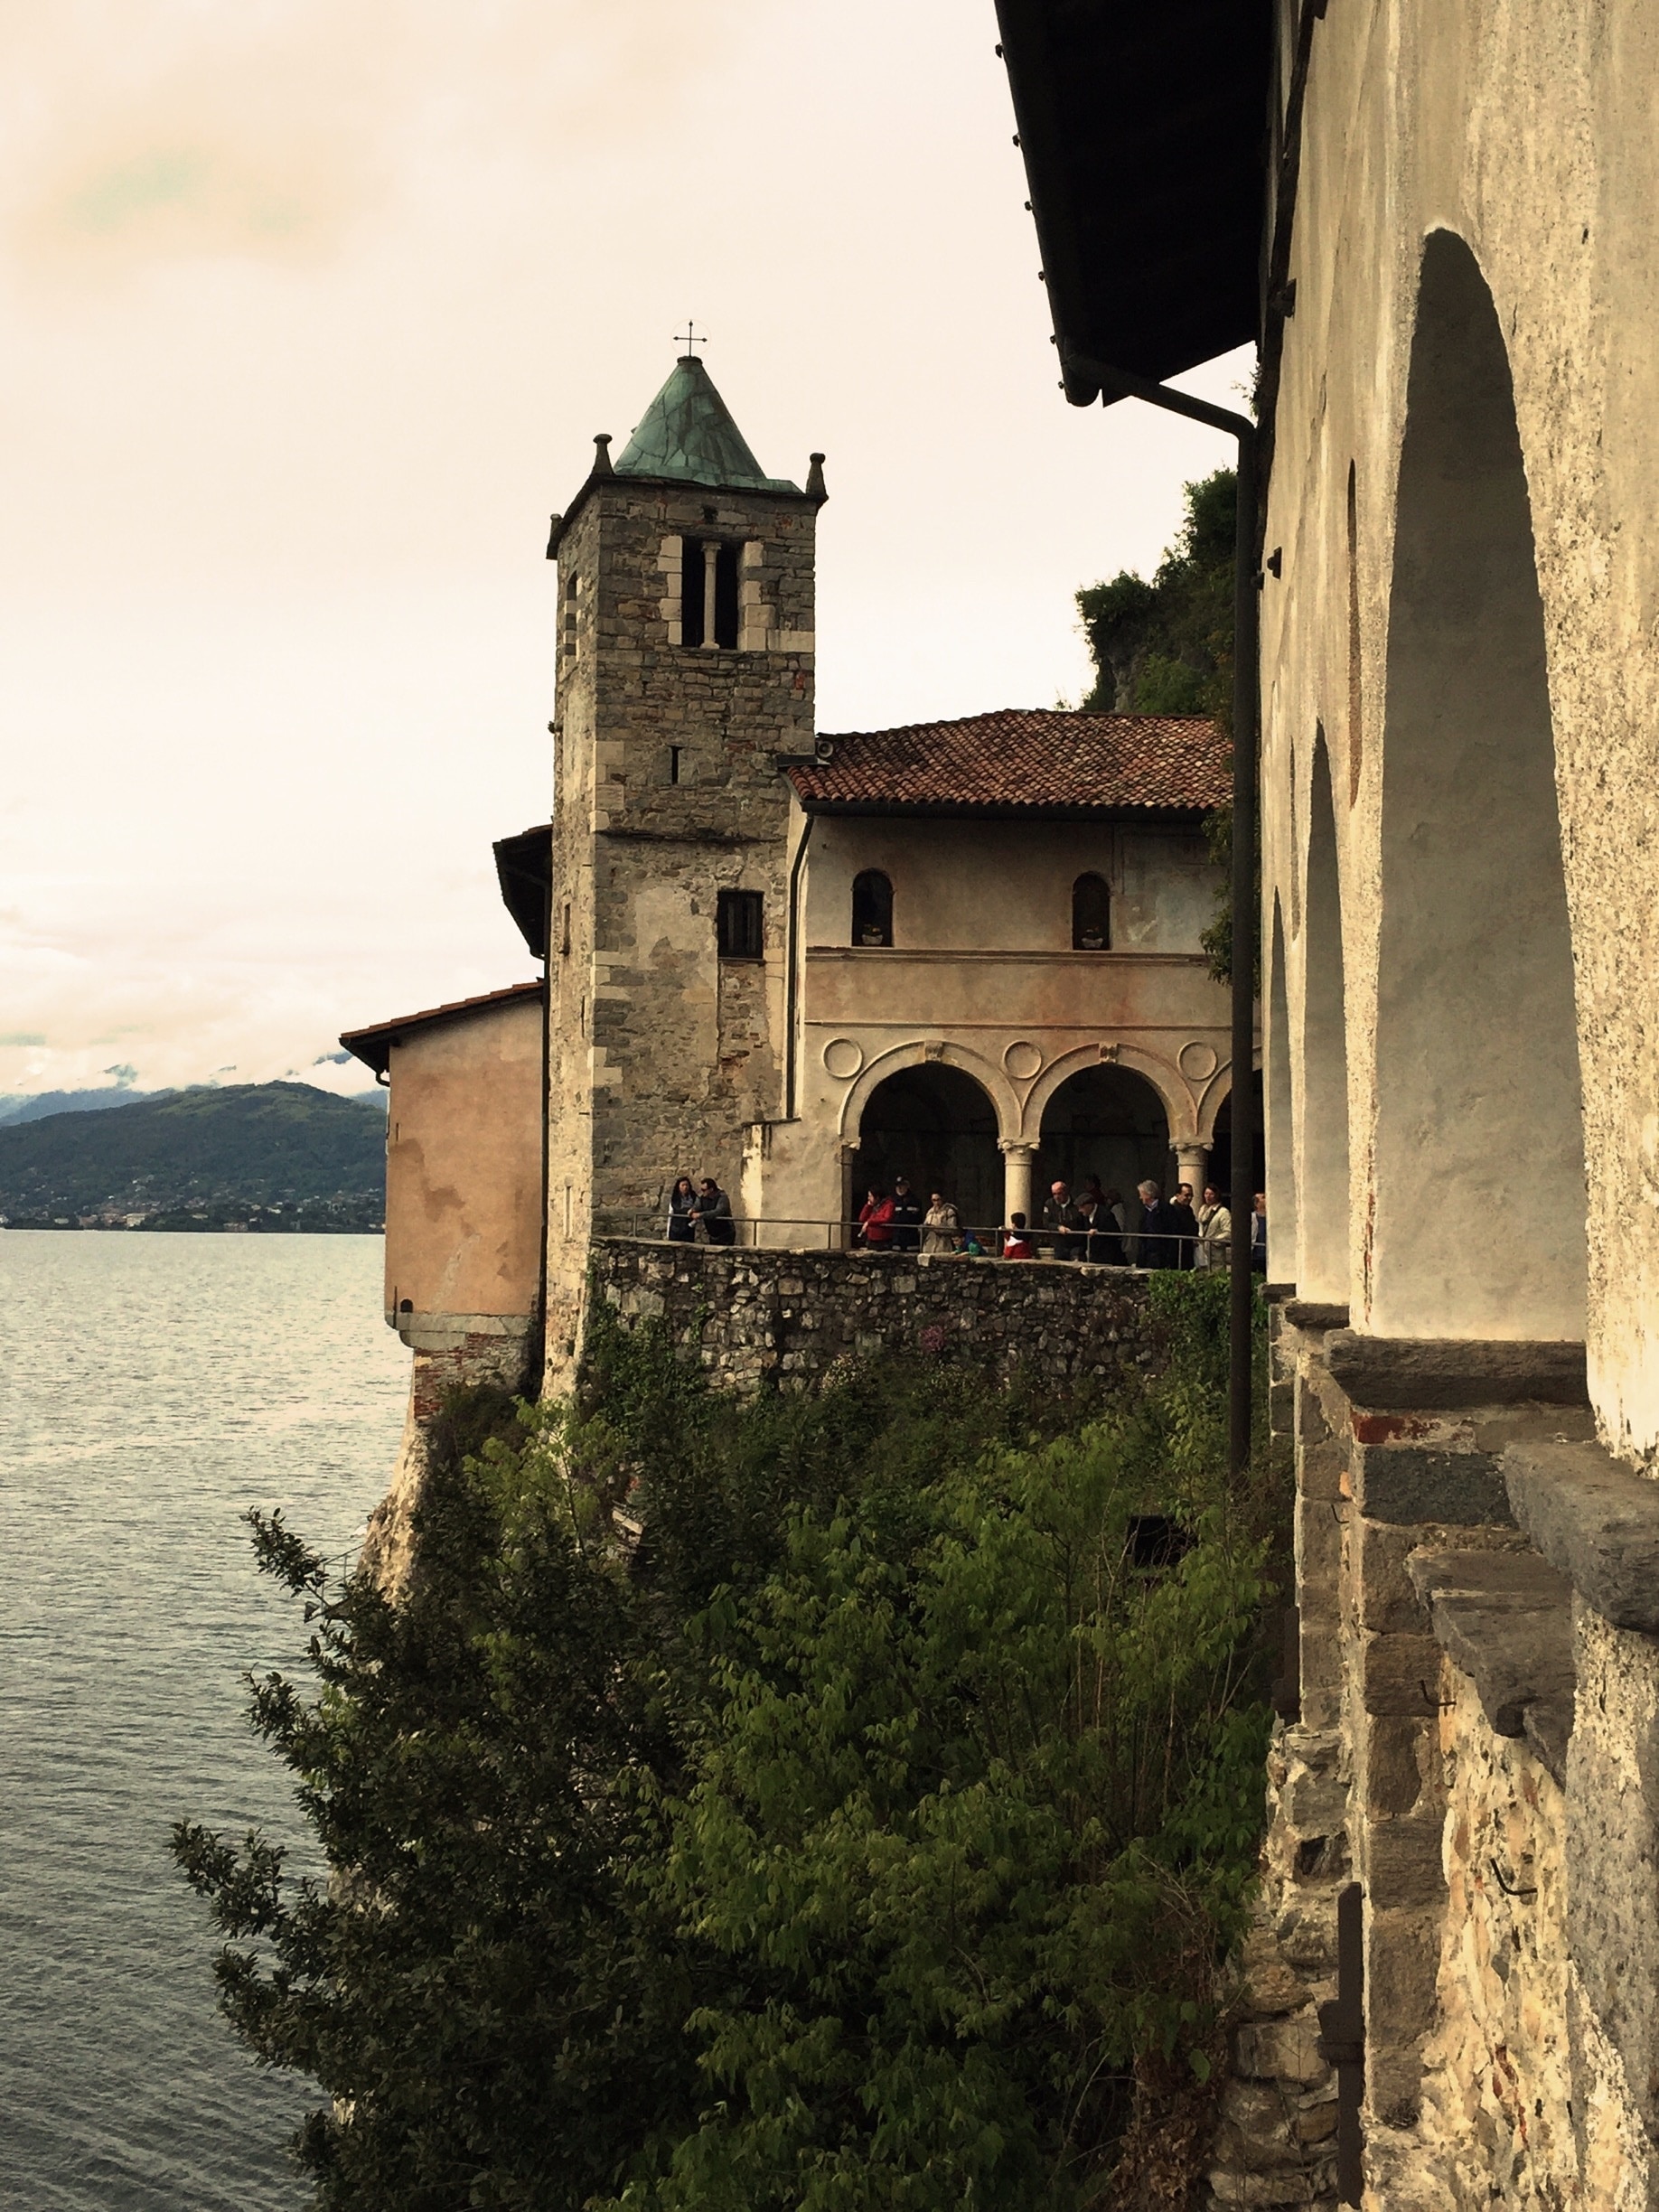 Santa Caterina Del Sasso, it's a very old place of peace and meditation.
There is a story of an Eremita who wanted to abandon everything and live in a peace with all over the world. He create a space that today is a famous place for the structure immediately direct to the lake and with a view overall the Maggiore Lake. 